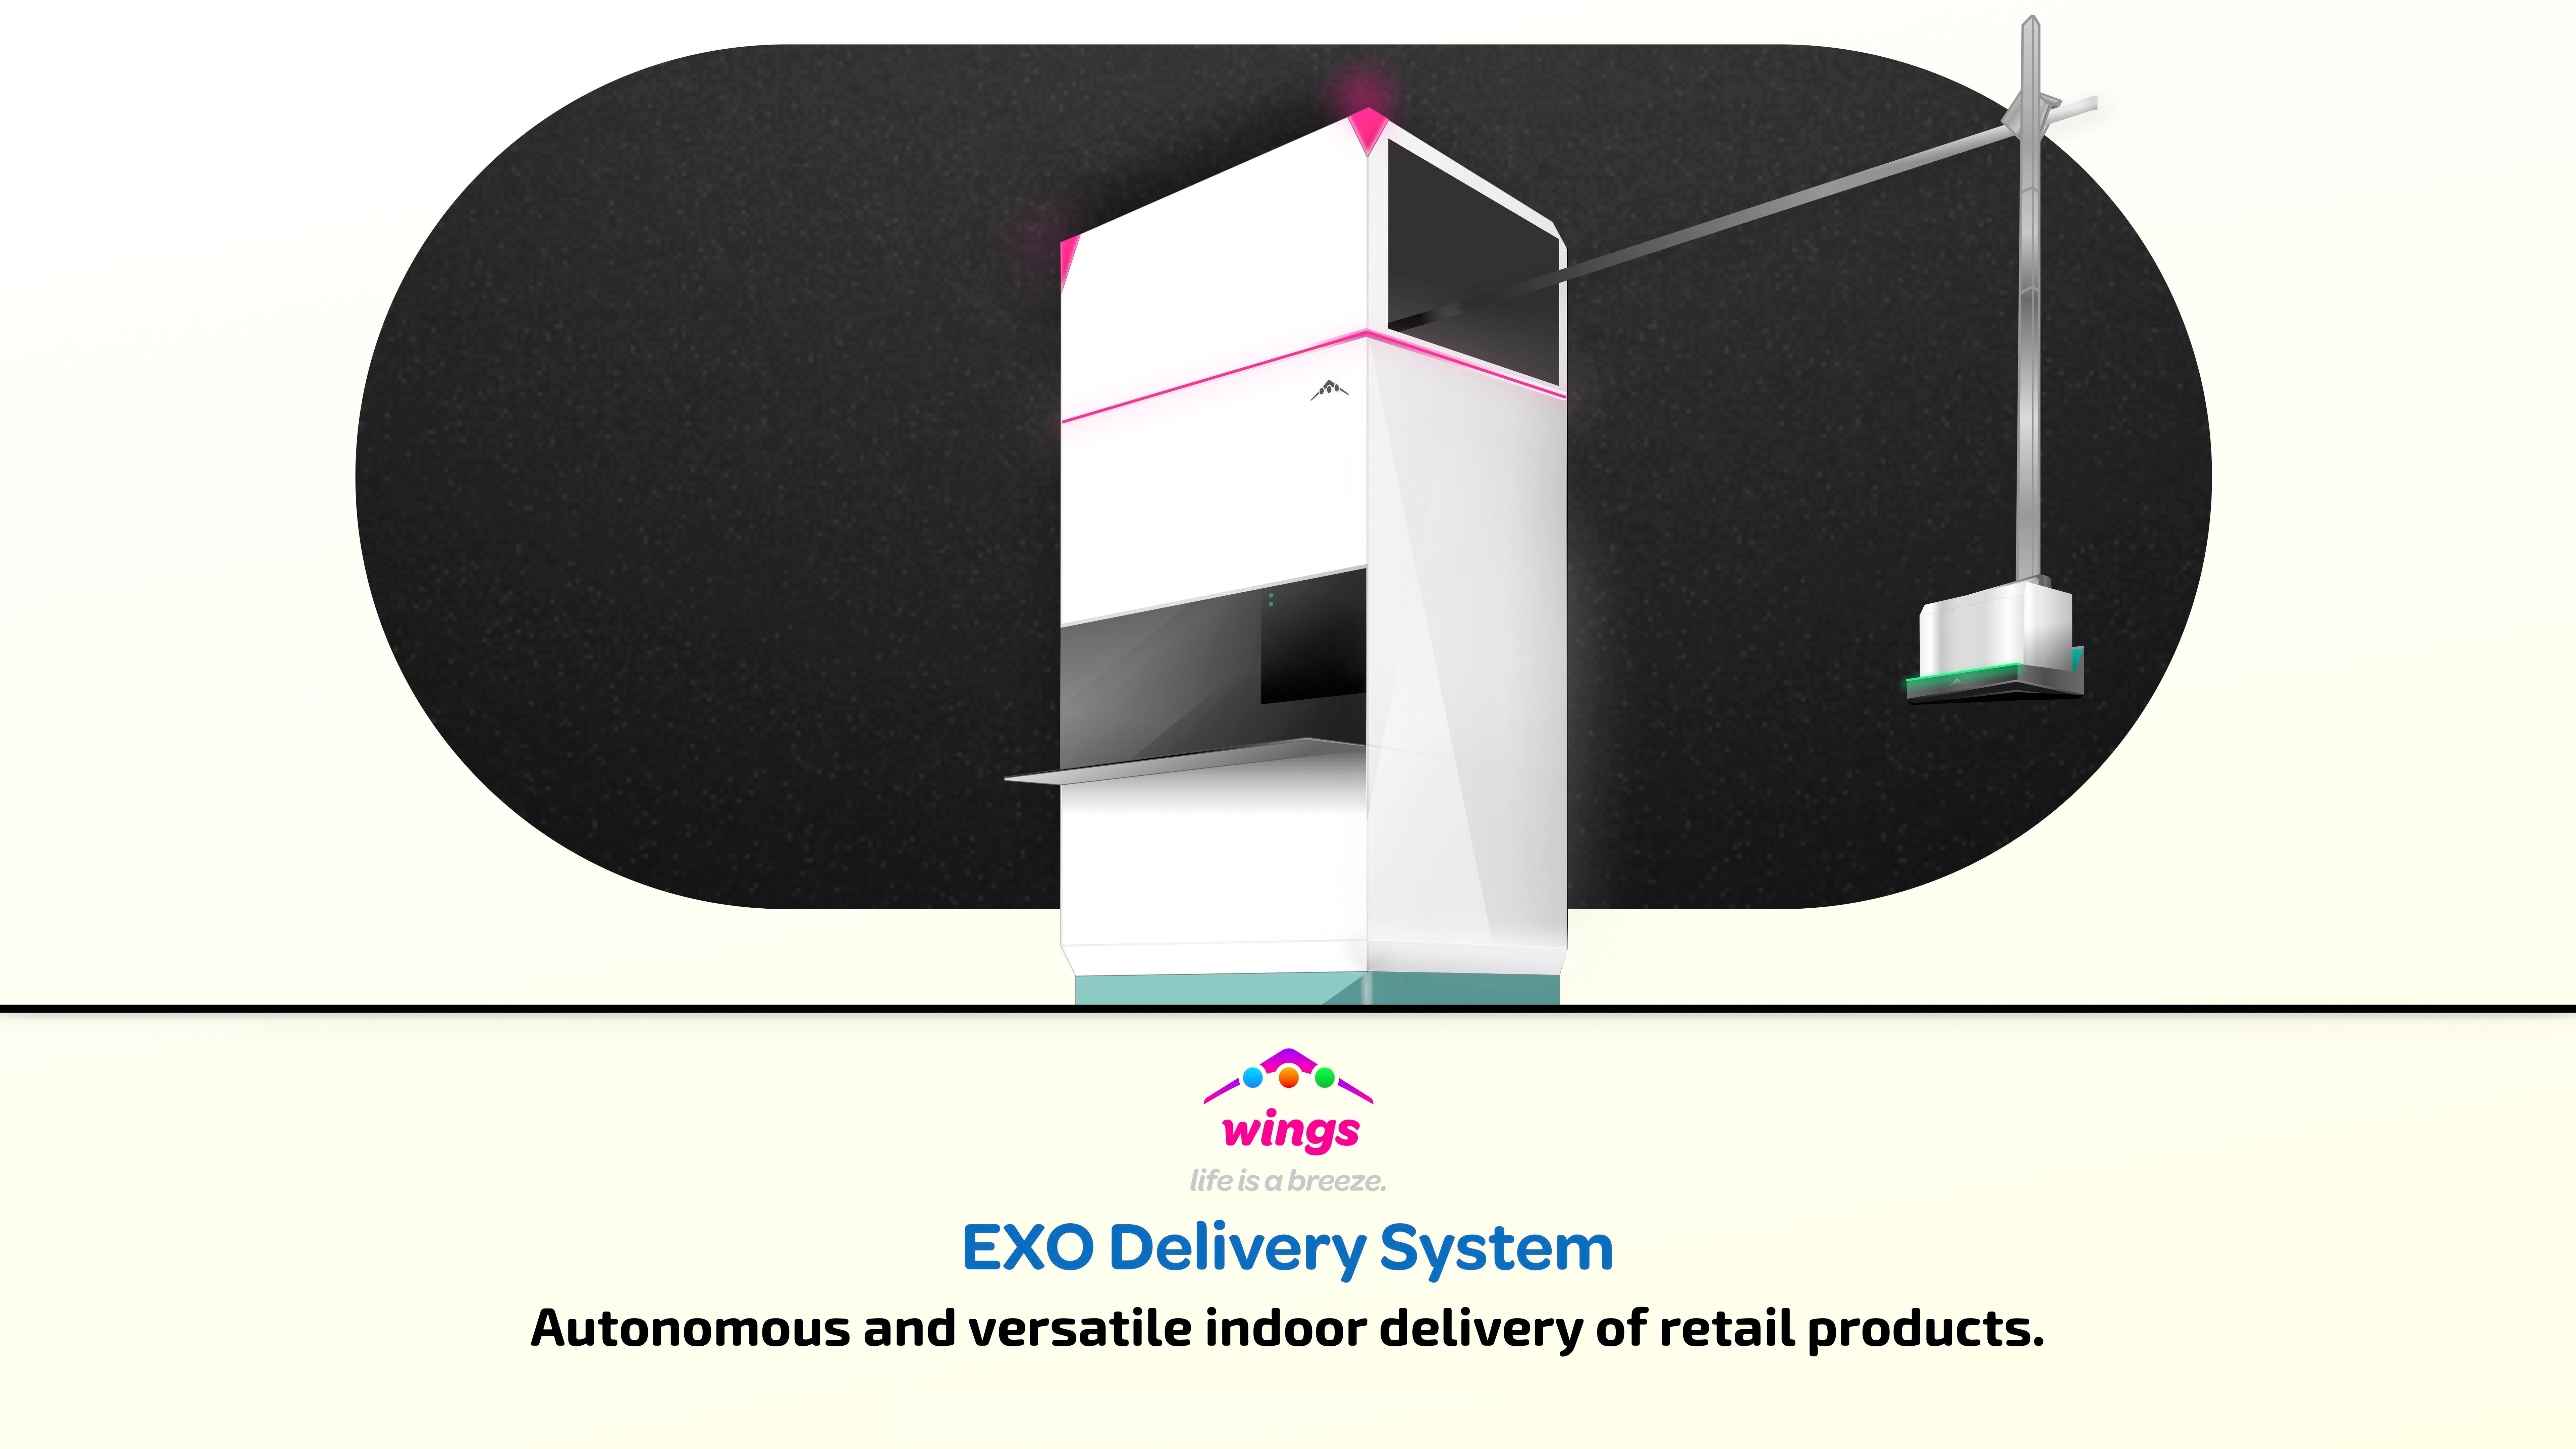 Marijuana Dispensary Collective Cannabis Enhances Operational Efficiency With Wings' EXO Delivery System